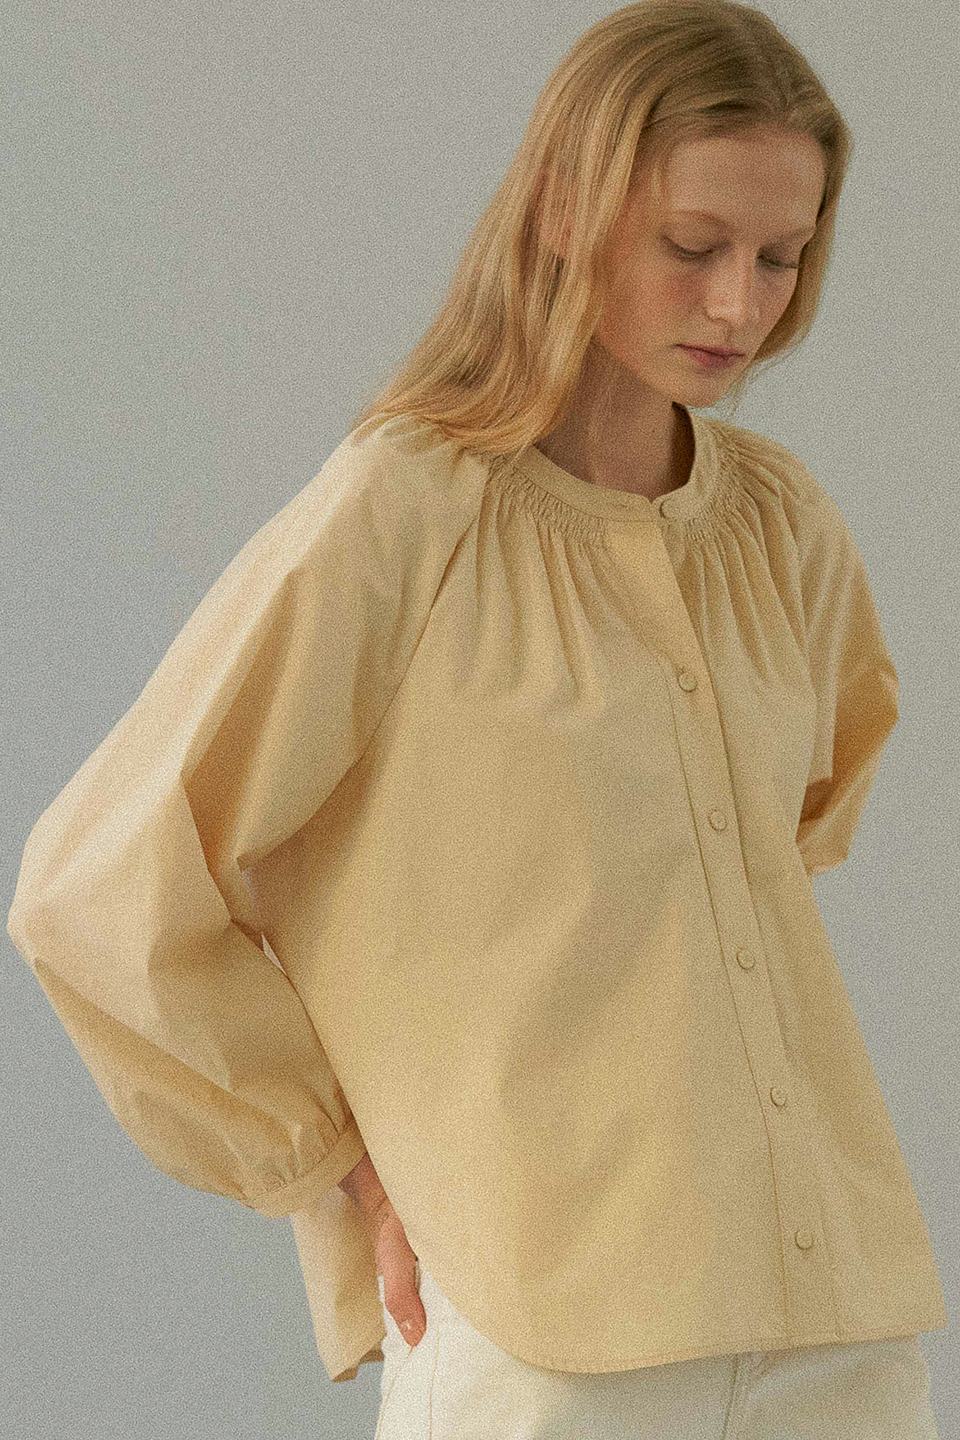 smocking cotton blouse (butter beige)